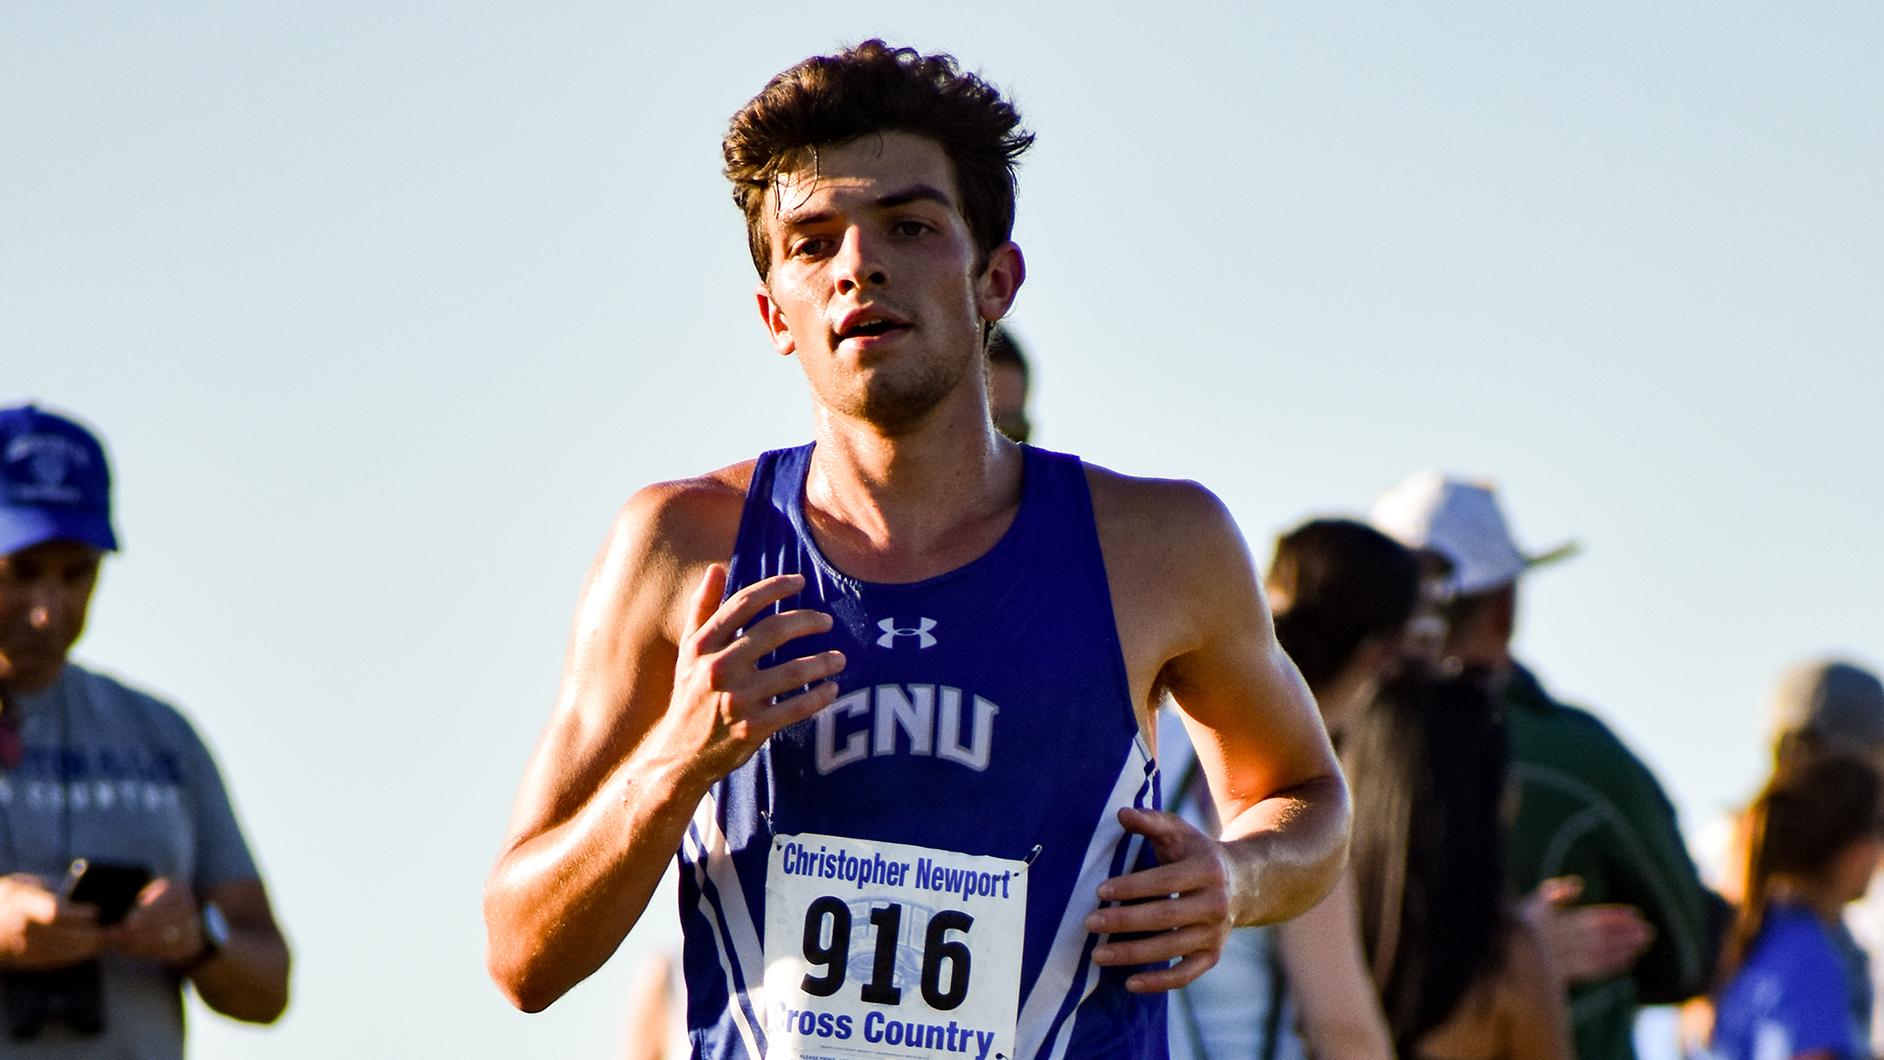 CNU's Daniel Ferrante Punctuates Cross Country Season with Solid Showing at NCAA National Championships